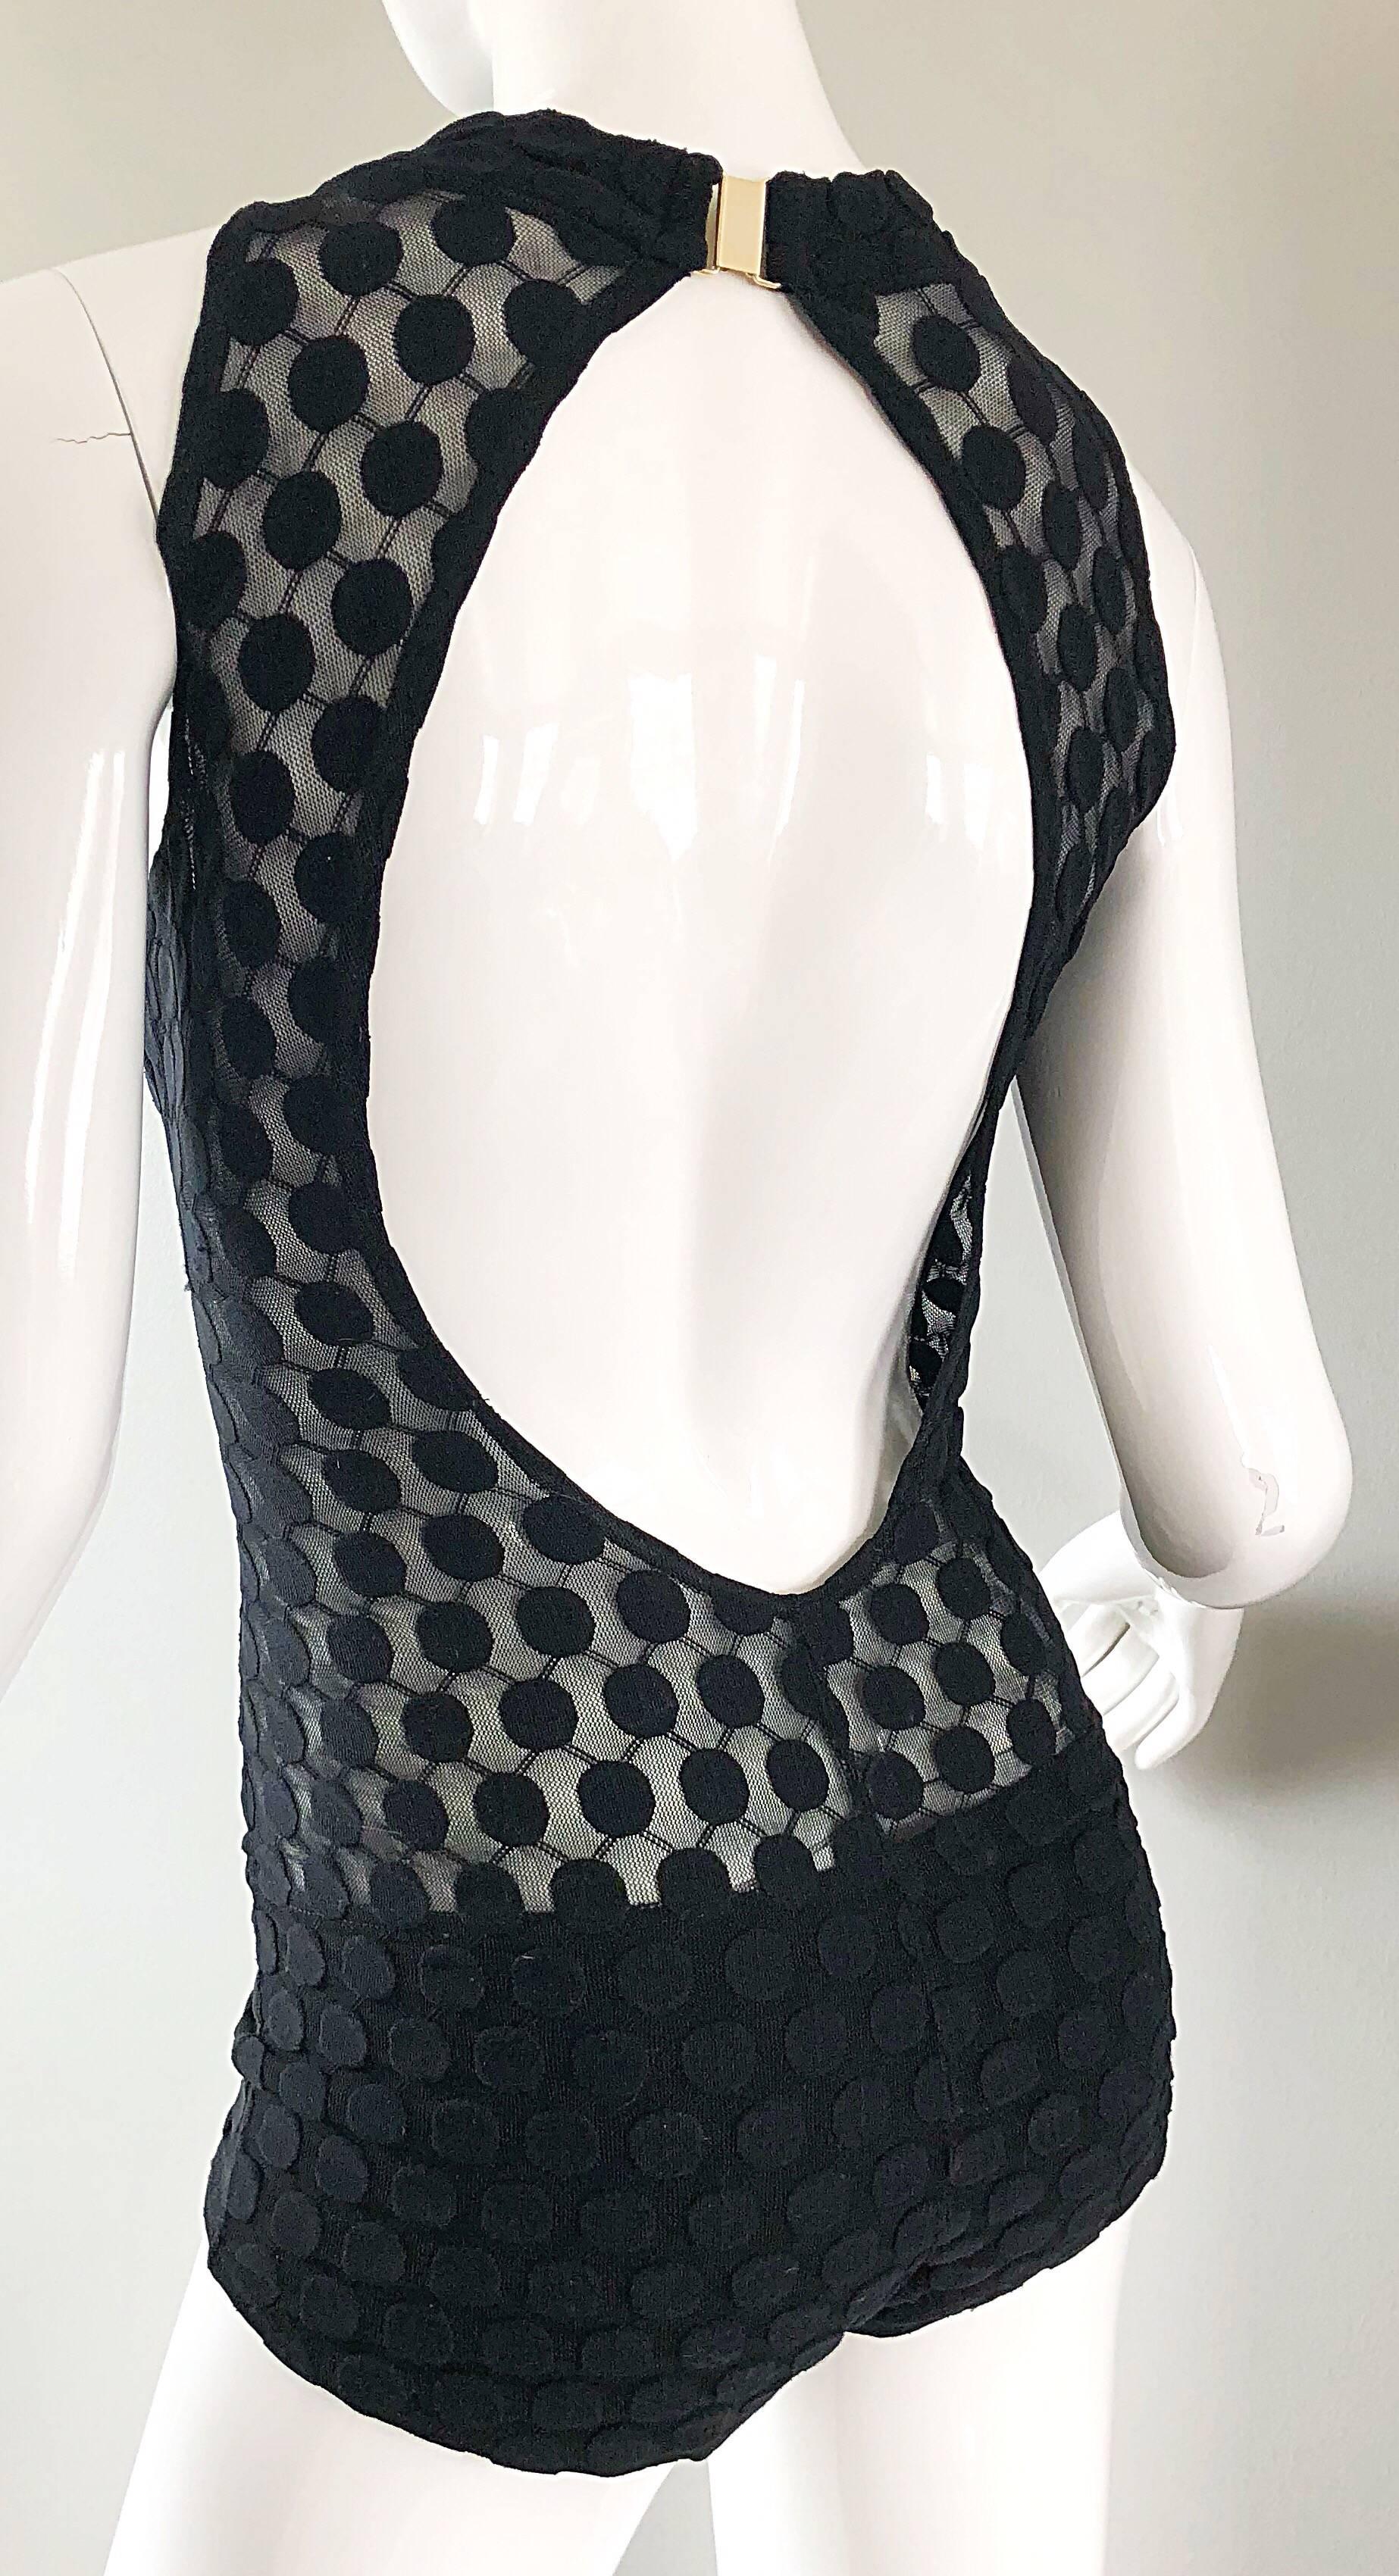 1960s Gottex Black Sheer Cut - Out Sexy One Piece 60s Vintage Swimsuit Bodysuit For Sale 2